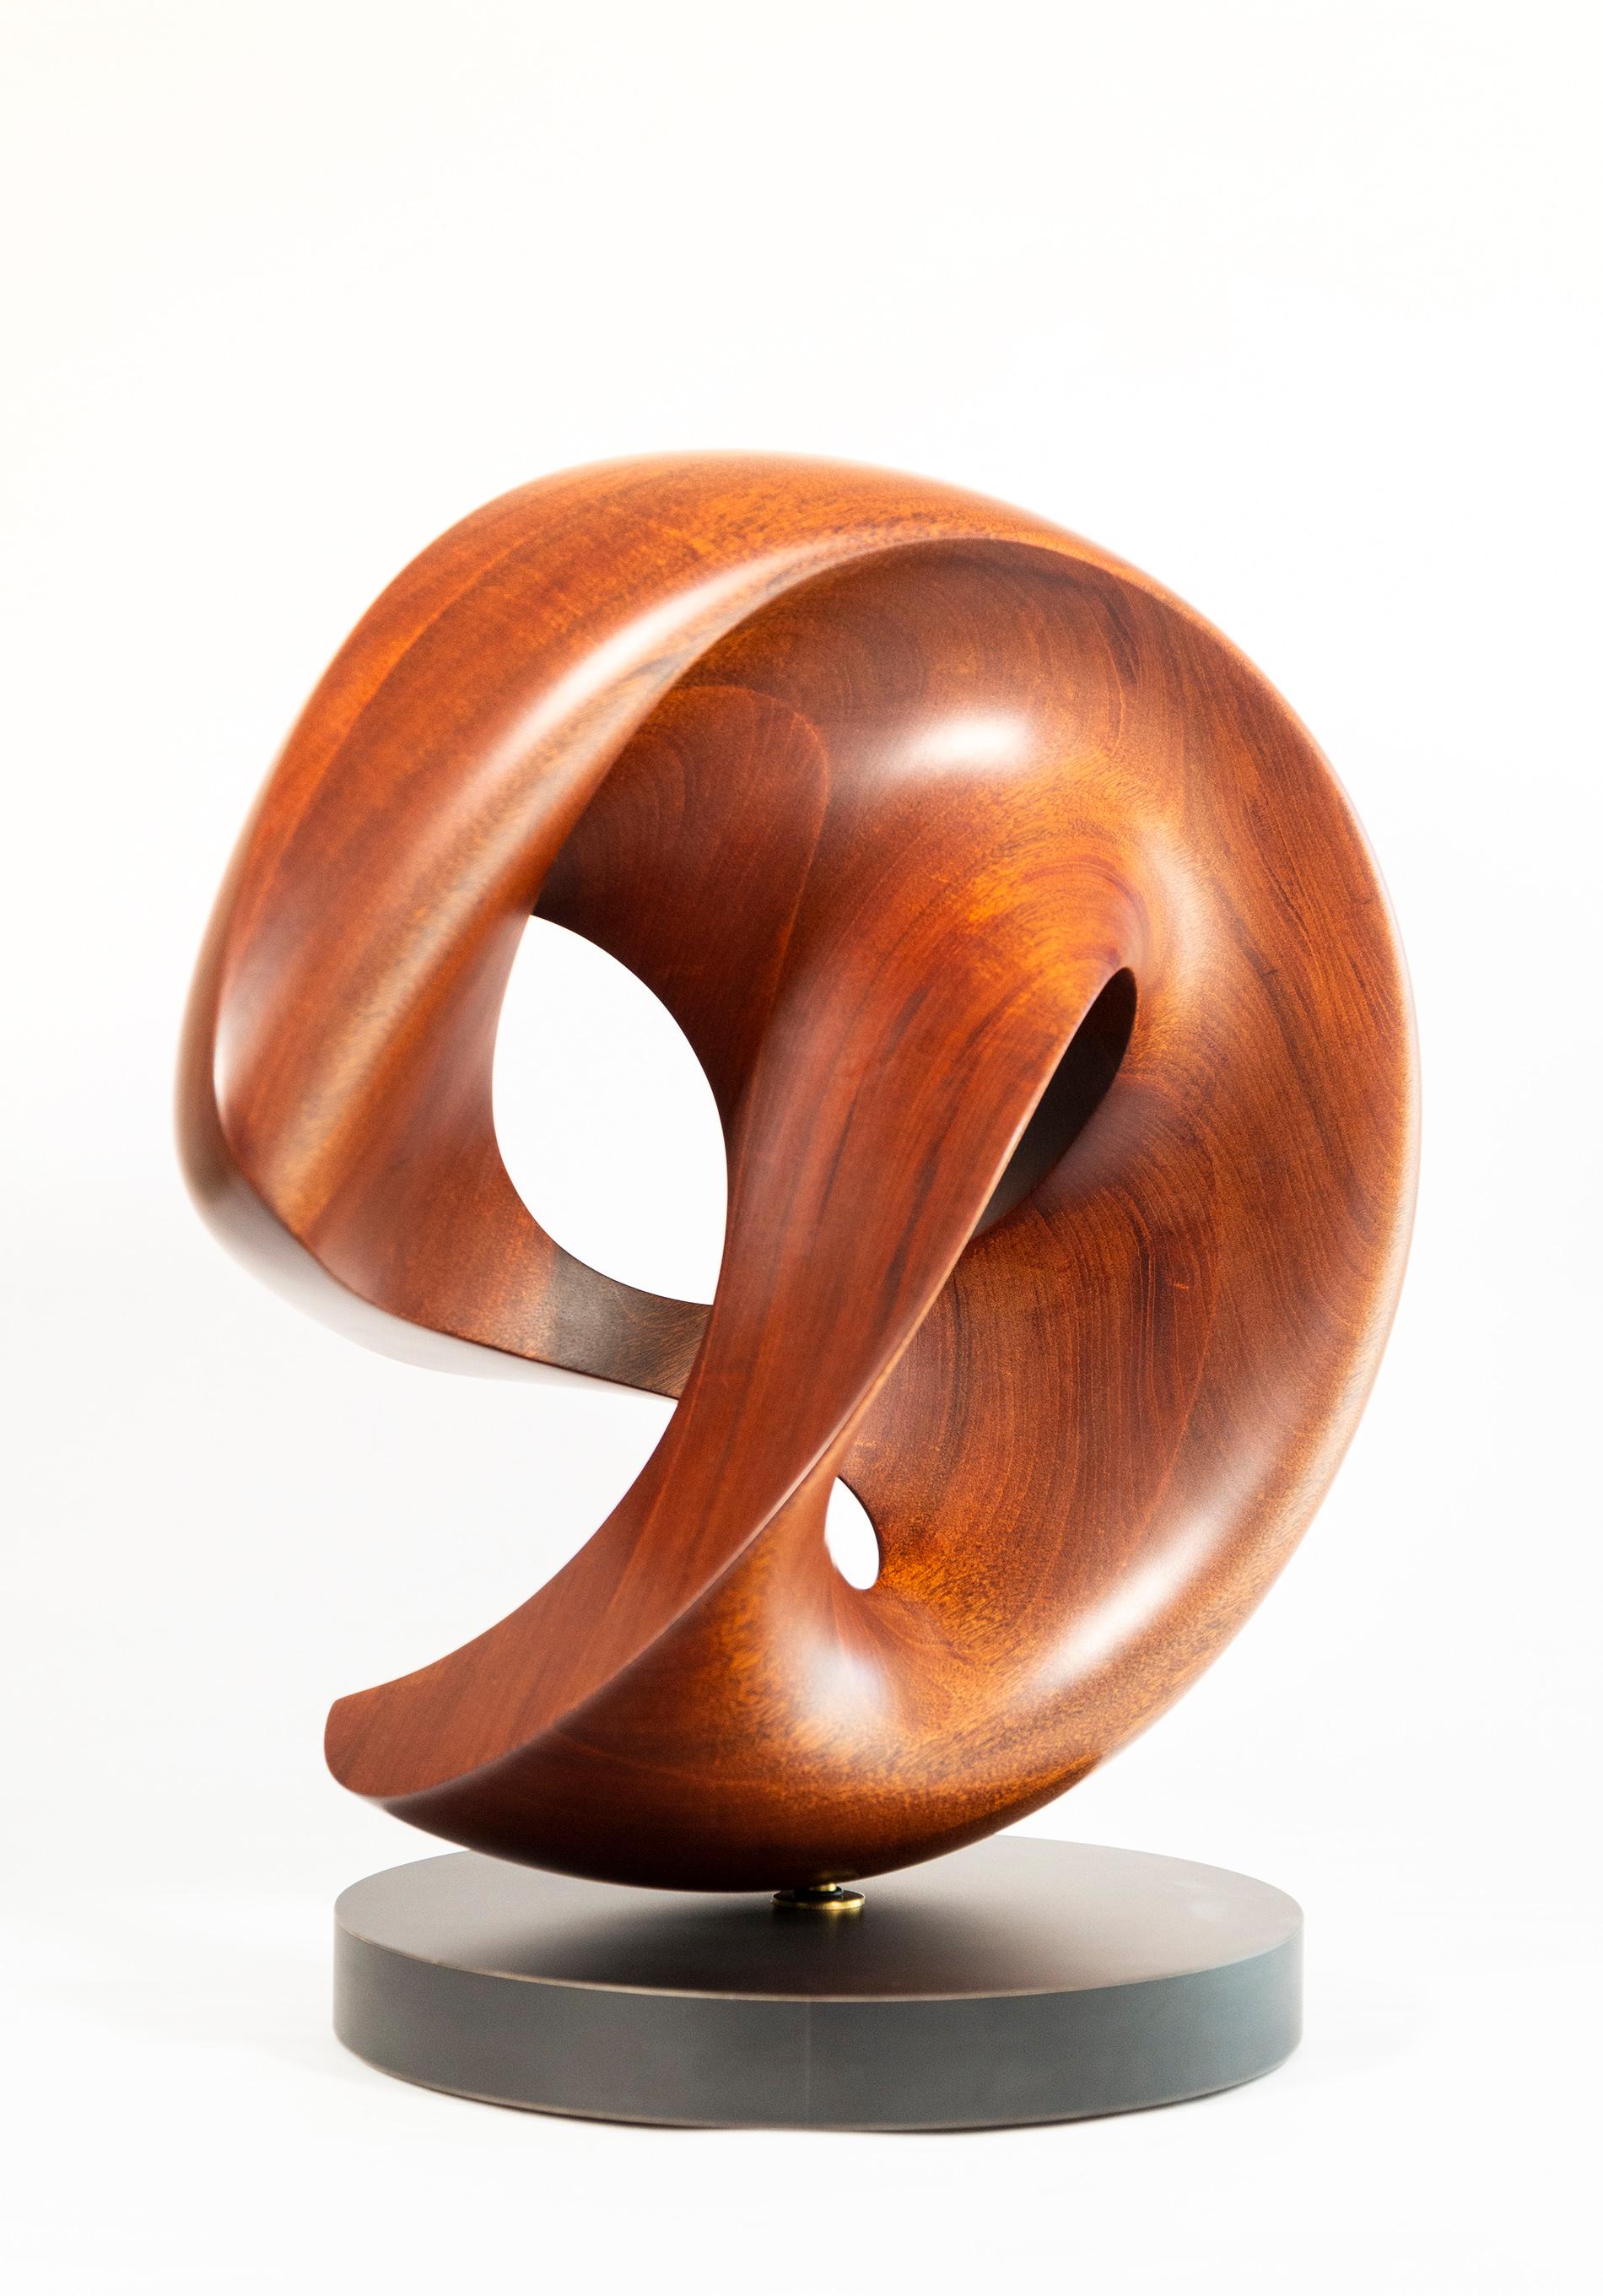 Fanfare - smooth, polished, abstract, contemporary, mahogany carved sculpture 6